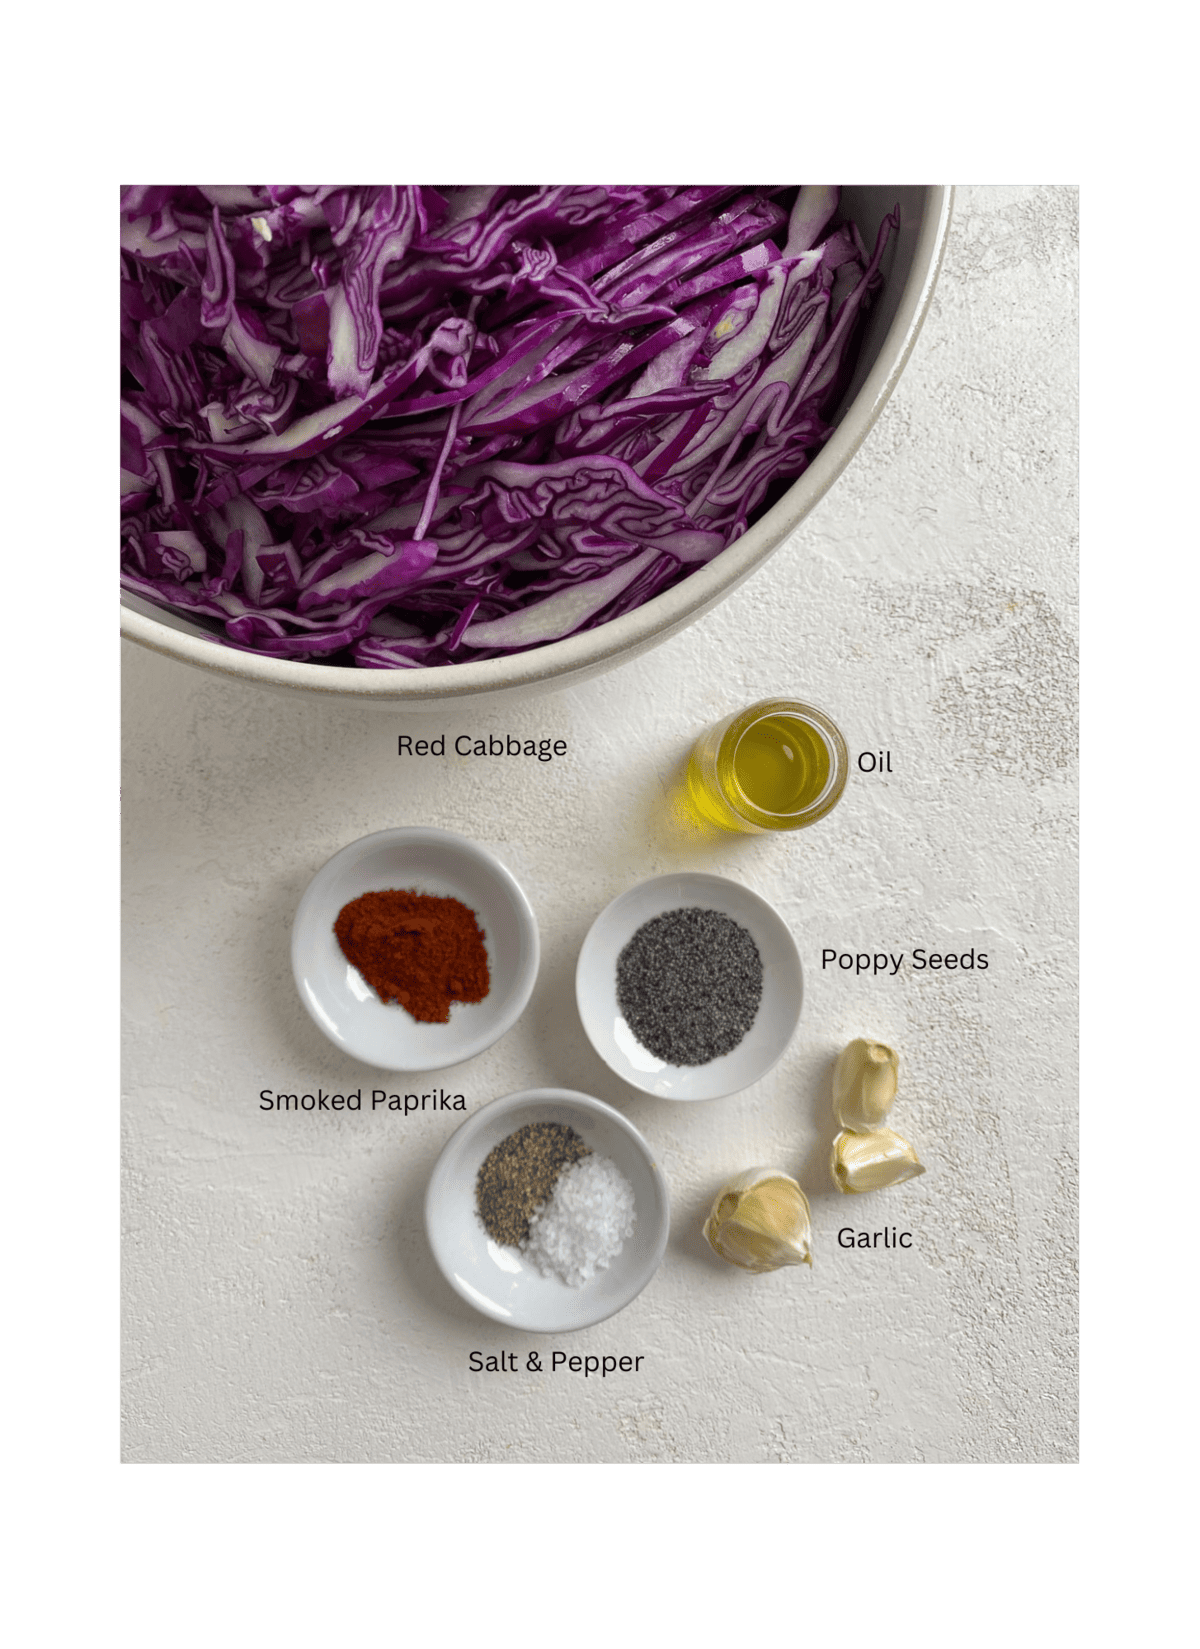 ingredients for Easy Vegan Fried Cabbage measured out against a light surface